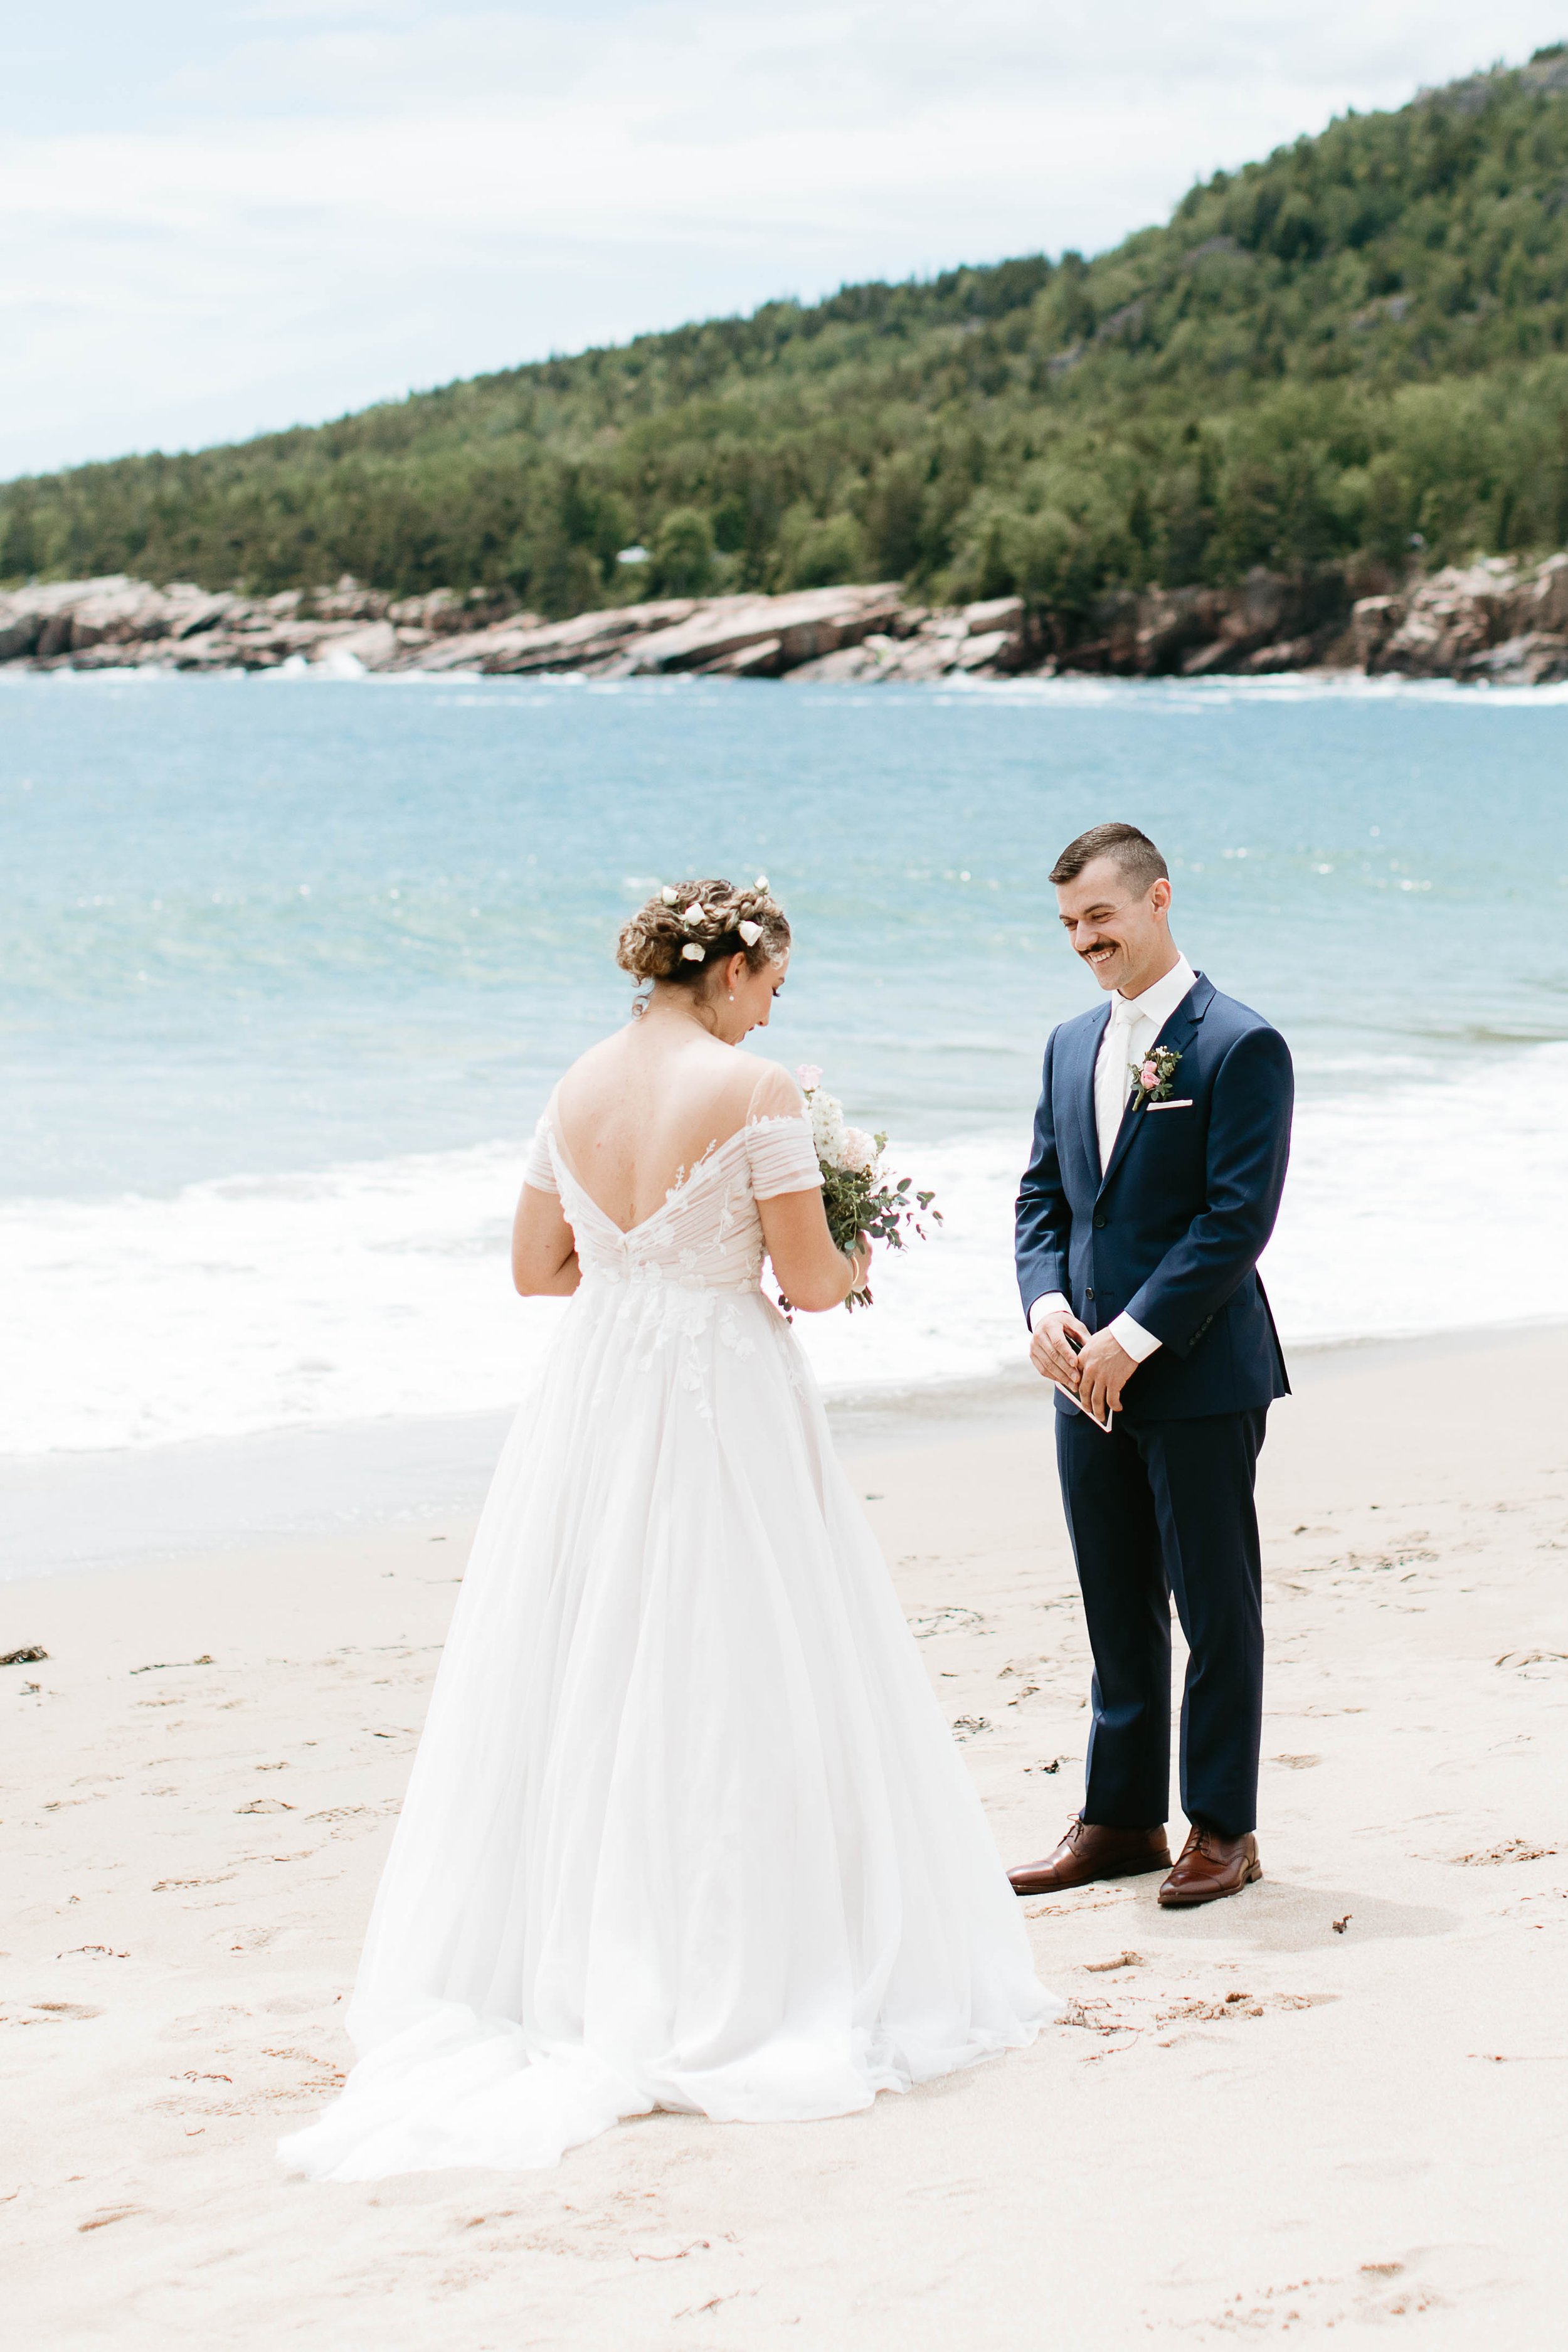   This is an image of a wedding couple standing on Sand Beach in Acadia national park during their elopement. They are facing each other reading their vows.  